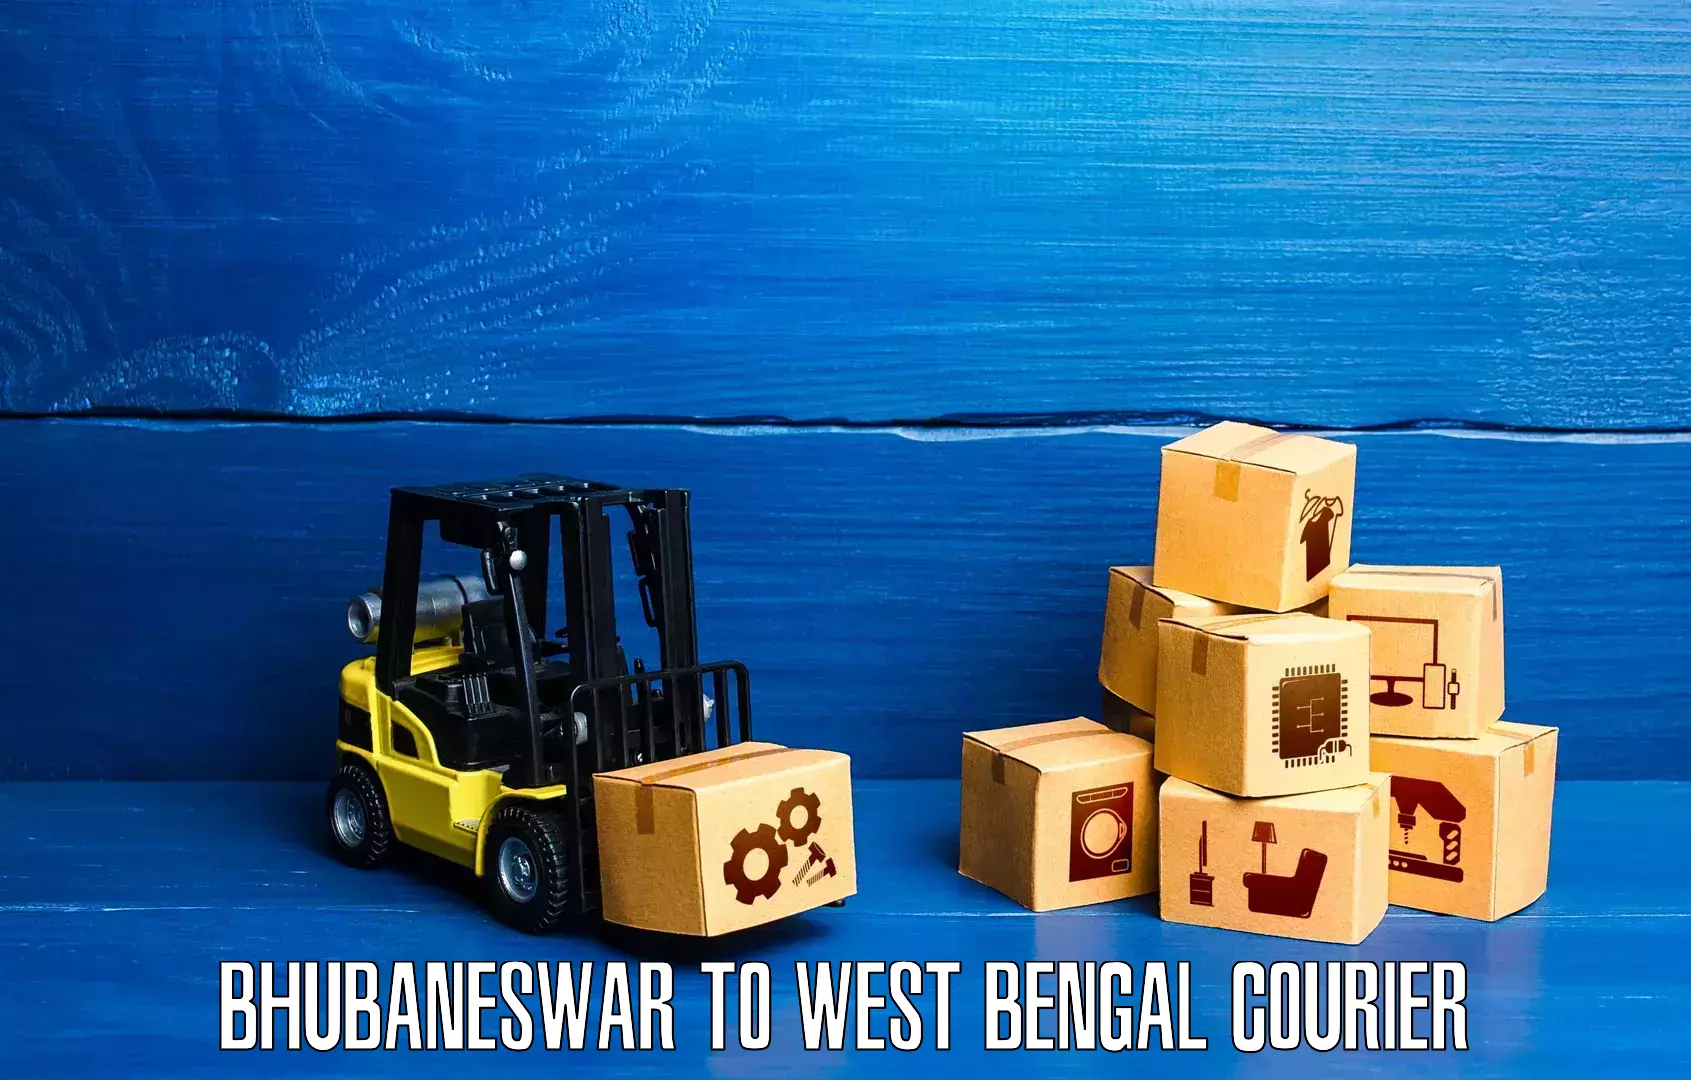 Package delivery network Bhubaneswar to Bolpur